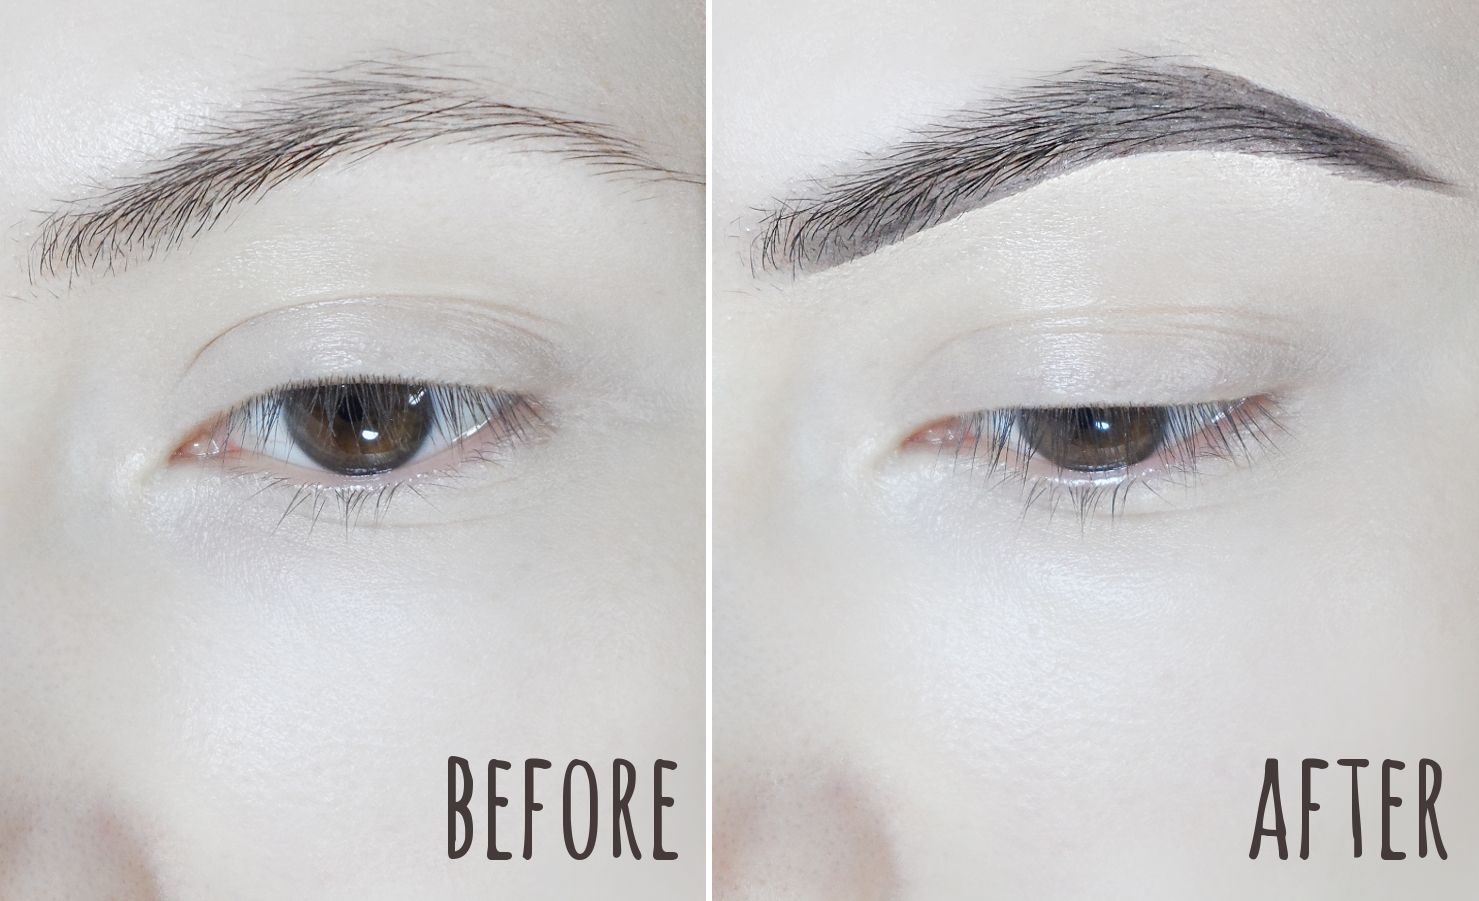 step-by-step makeup pictorial showing how to do a perfect, instagram-looking eyebrows